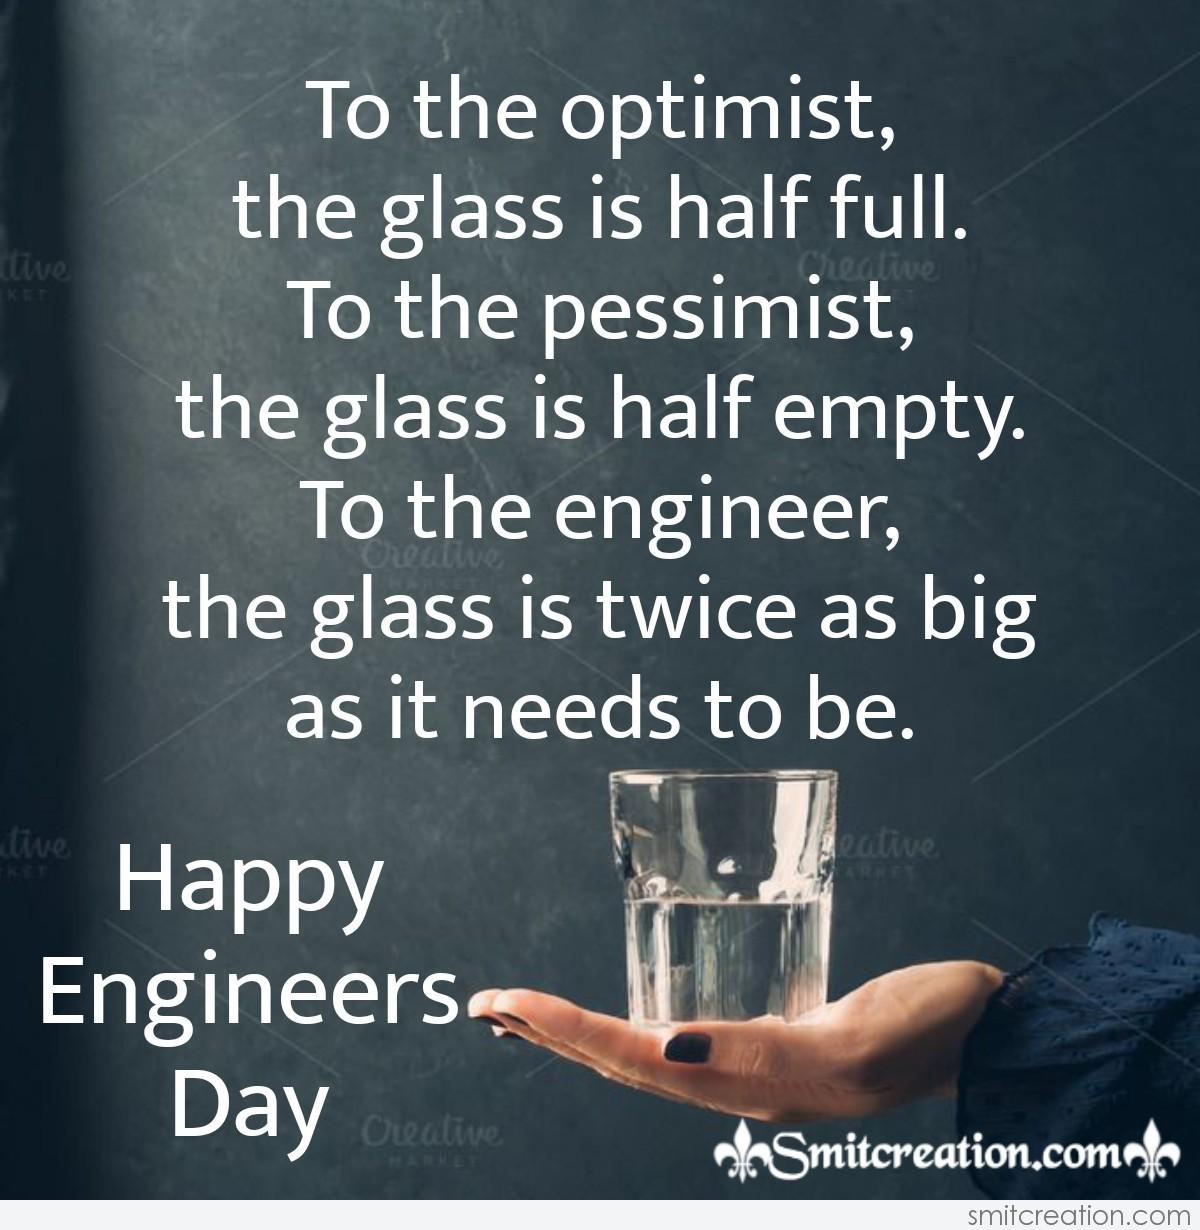 Happy Engineers Day Message 